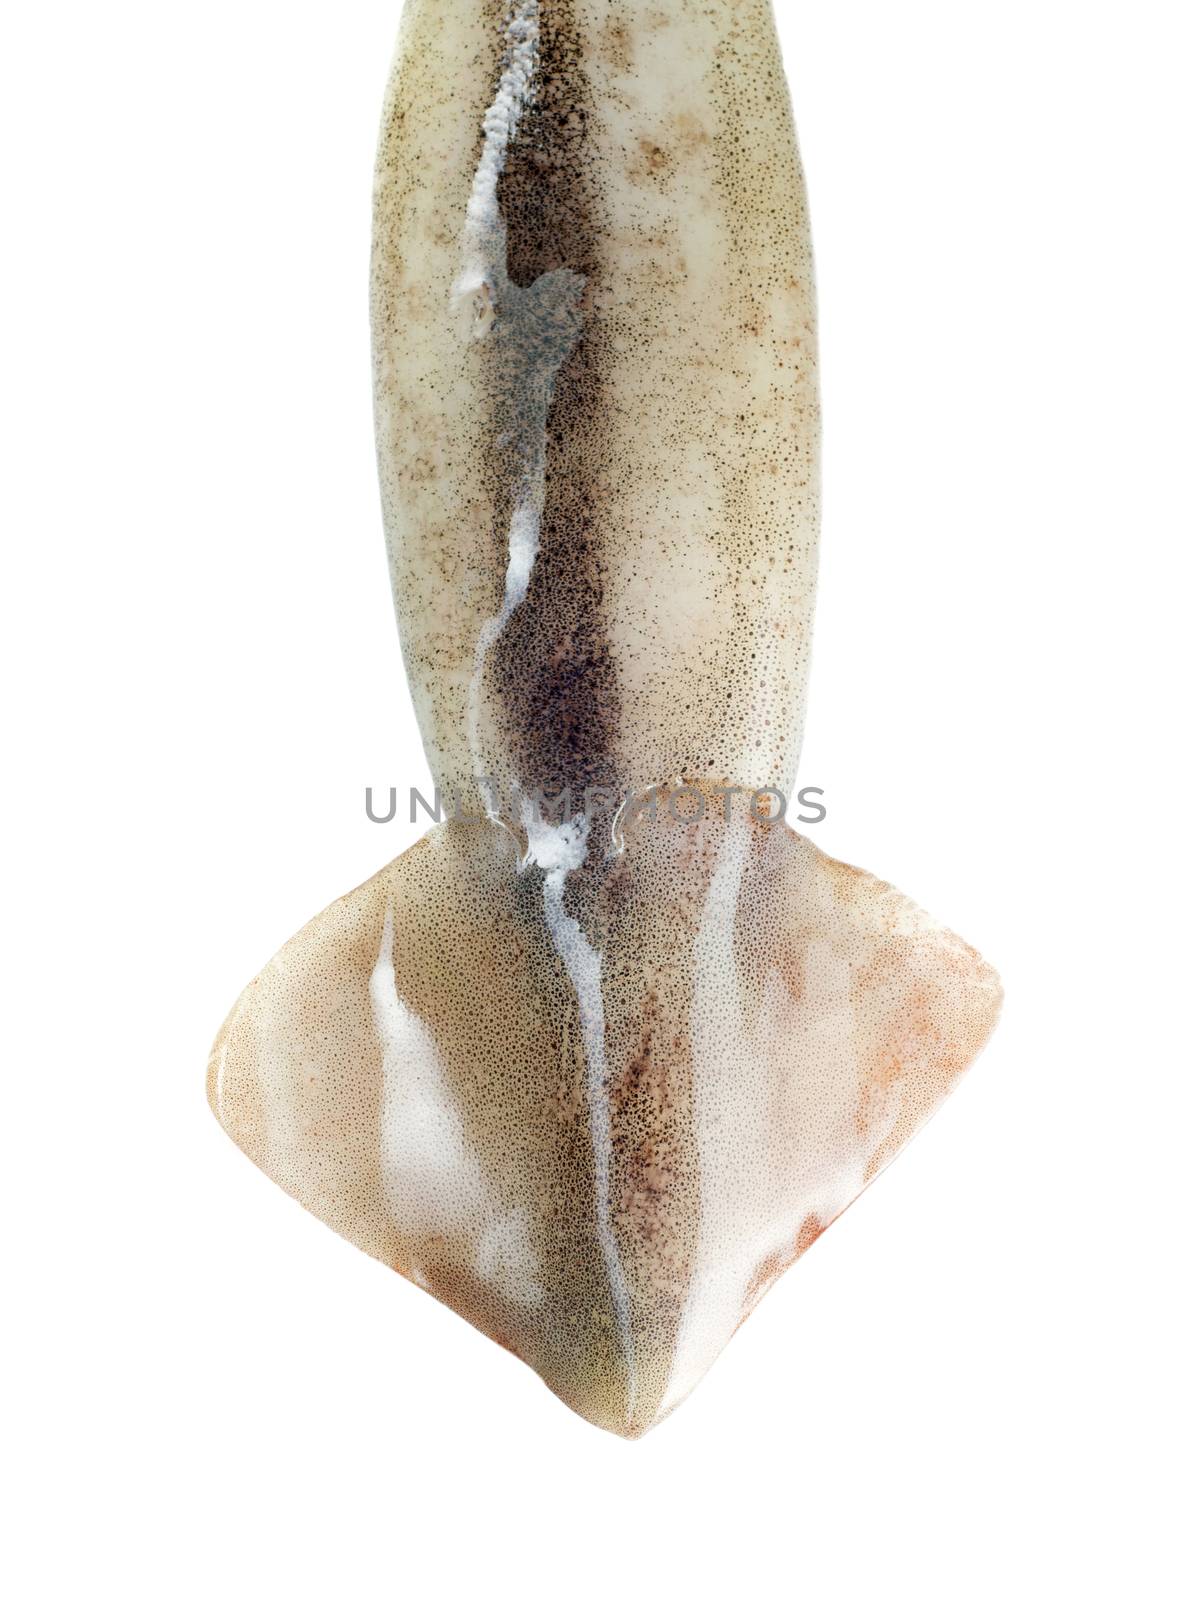 Squid tail isolated on a white background 